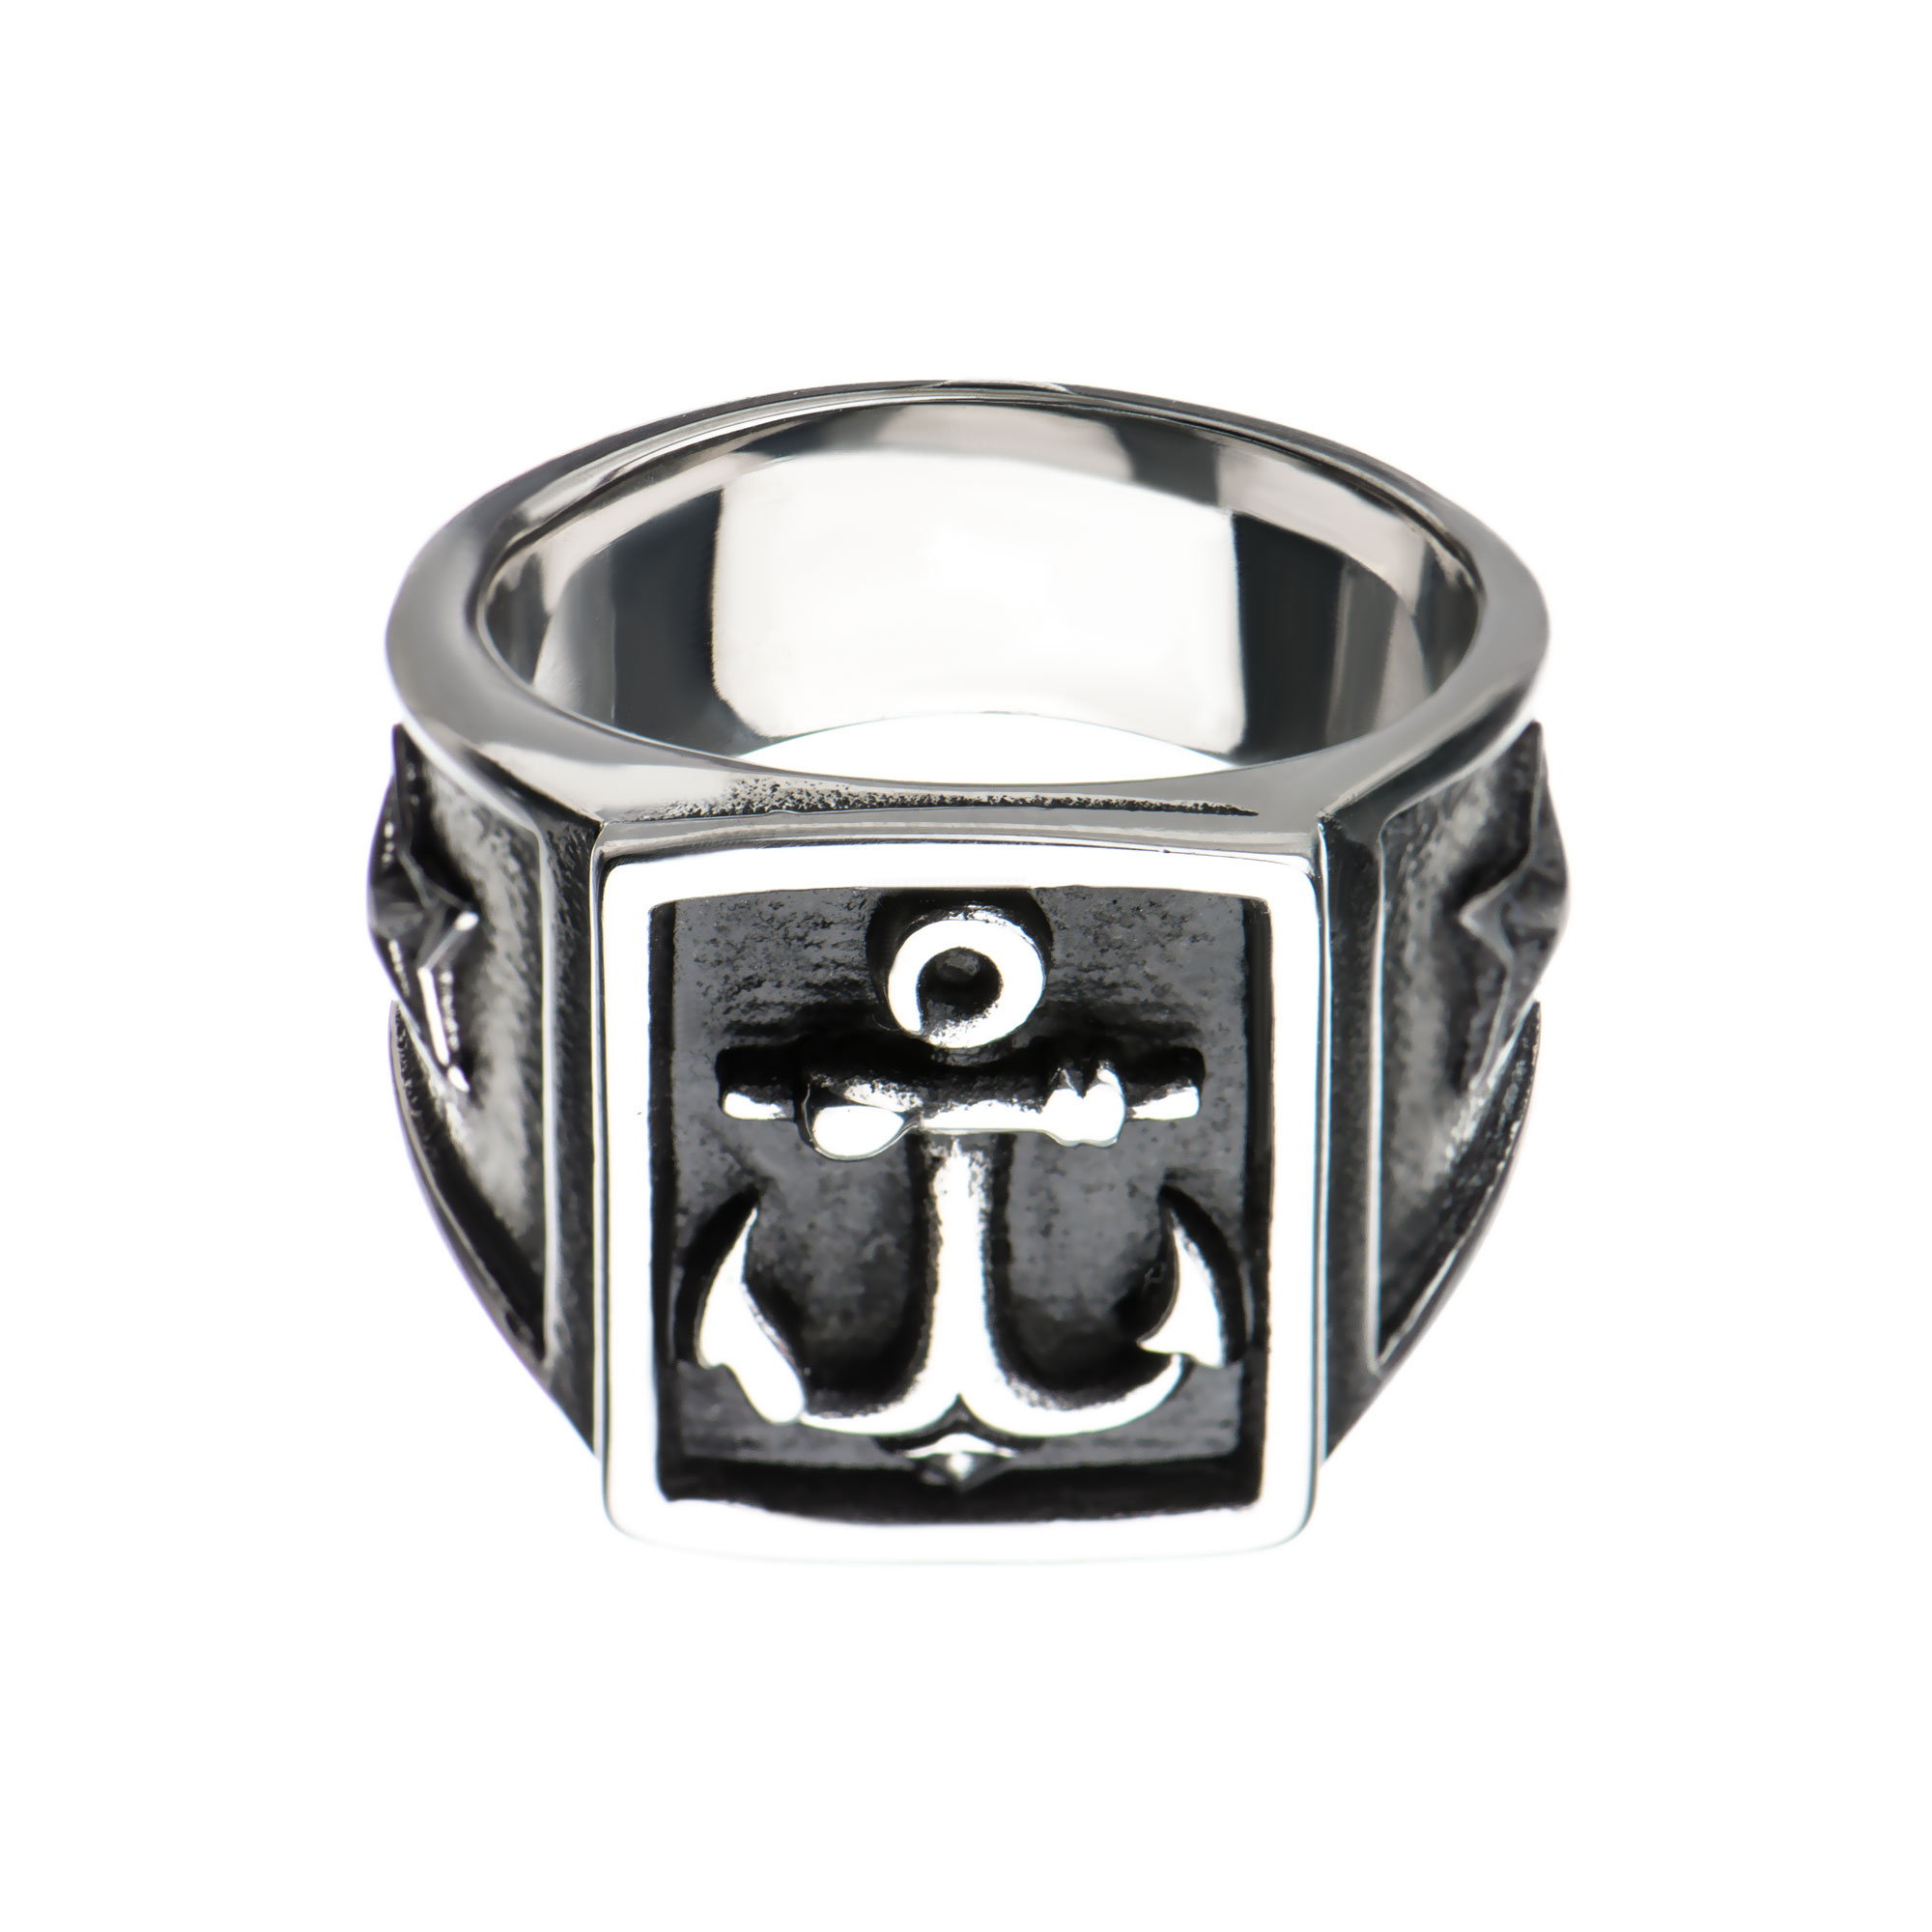 Steel & Black Plated Oxidized Anchor Signet Ring Image 2 Midtown Diamonds Reno, NV